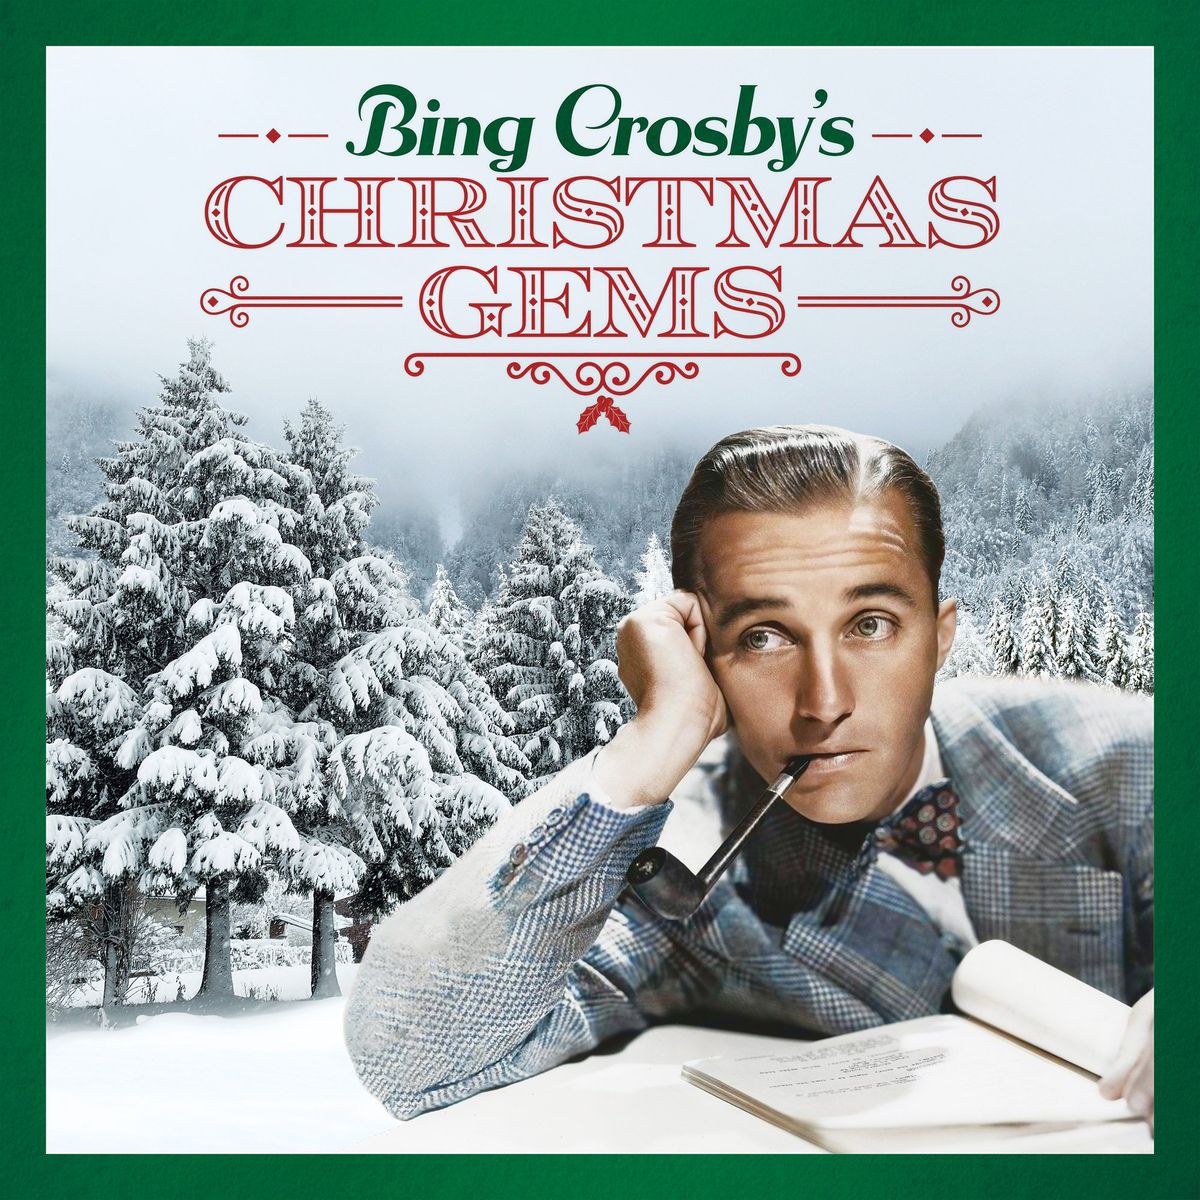 The new collection “Bing Crosby’s Christmas Gems” includes some beloved favorite as well as some that have not been released before. 